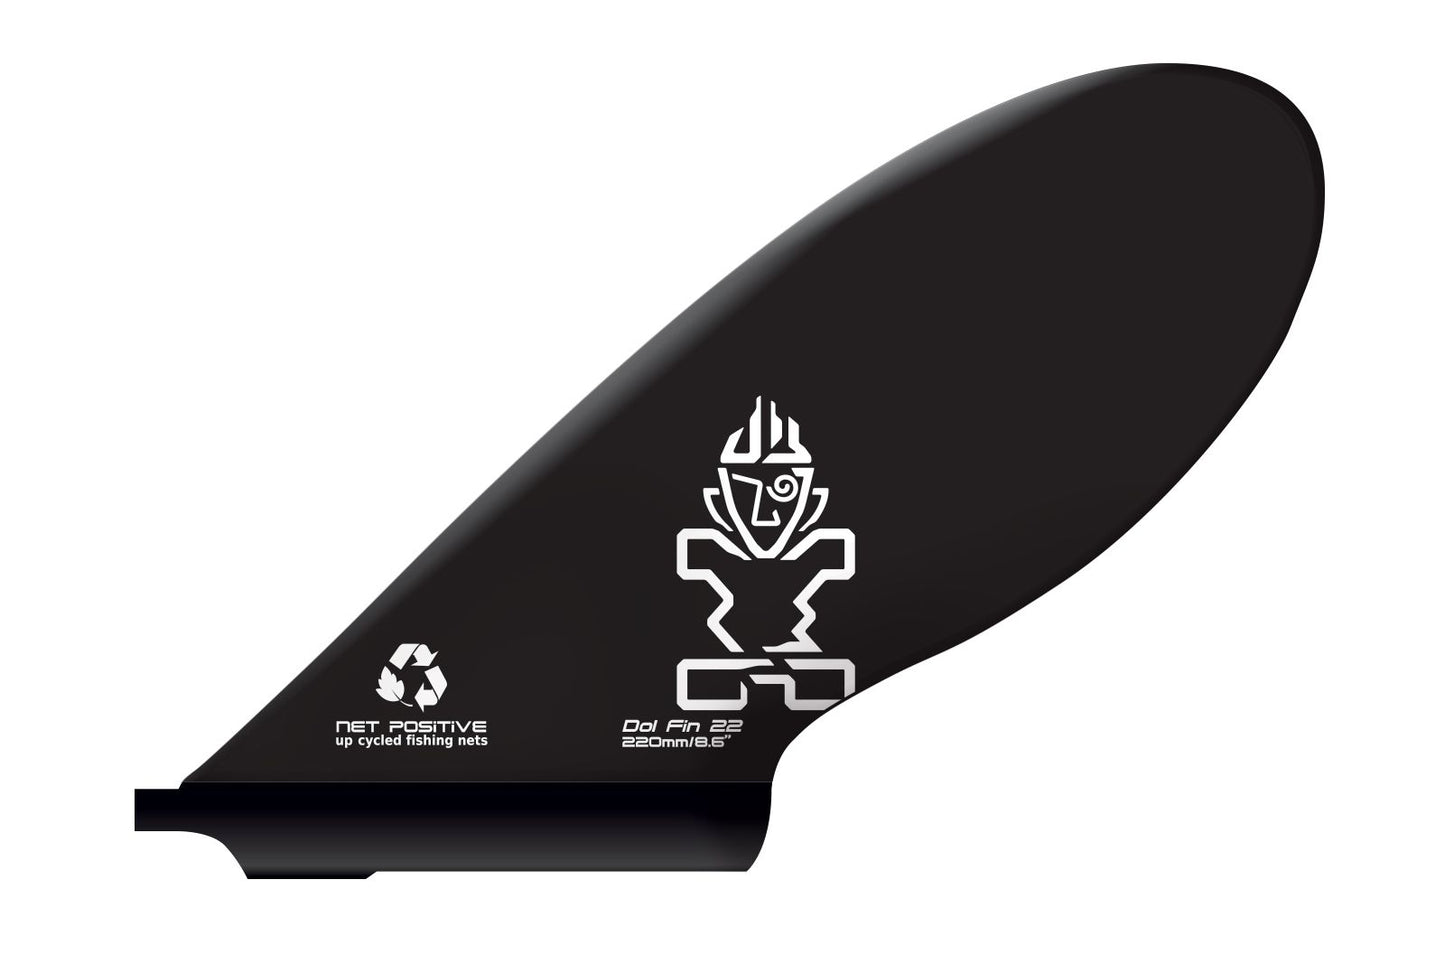 Starboard SUP Dol-Fin 22 Net Positive